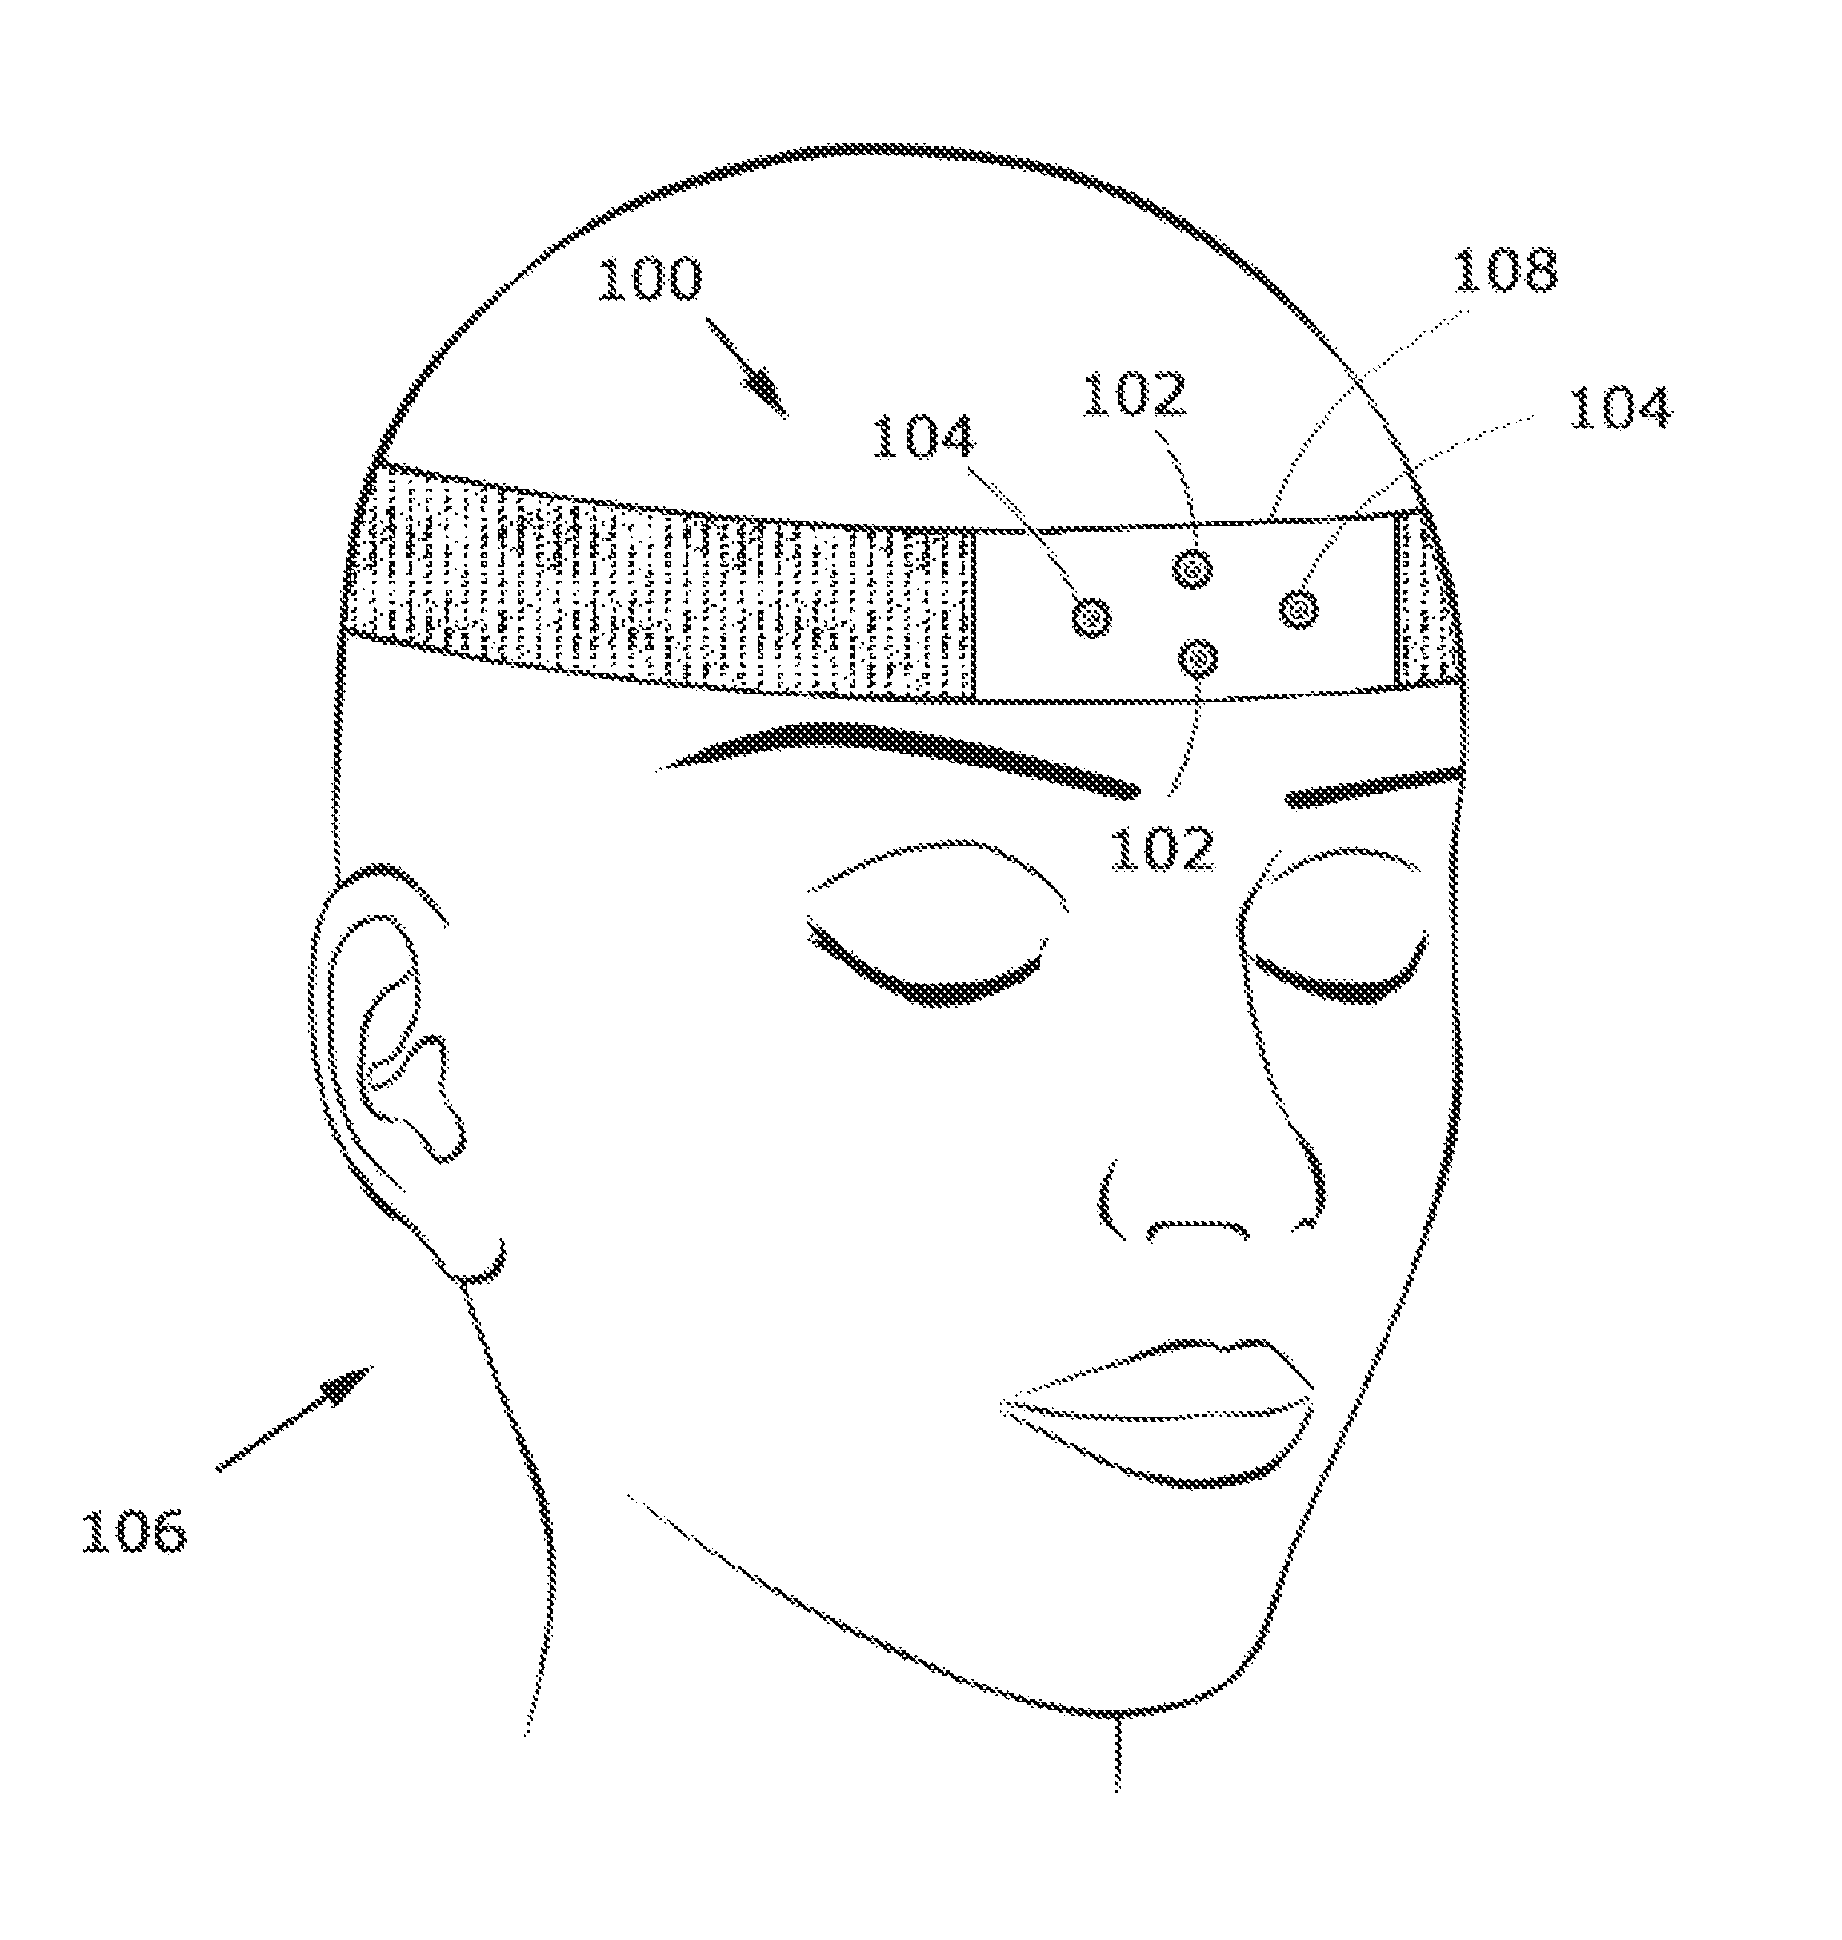 Dual-purpose sleep-wearable headgear for monitoring and stimulating the brain of a sleeping person